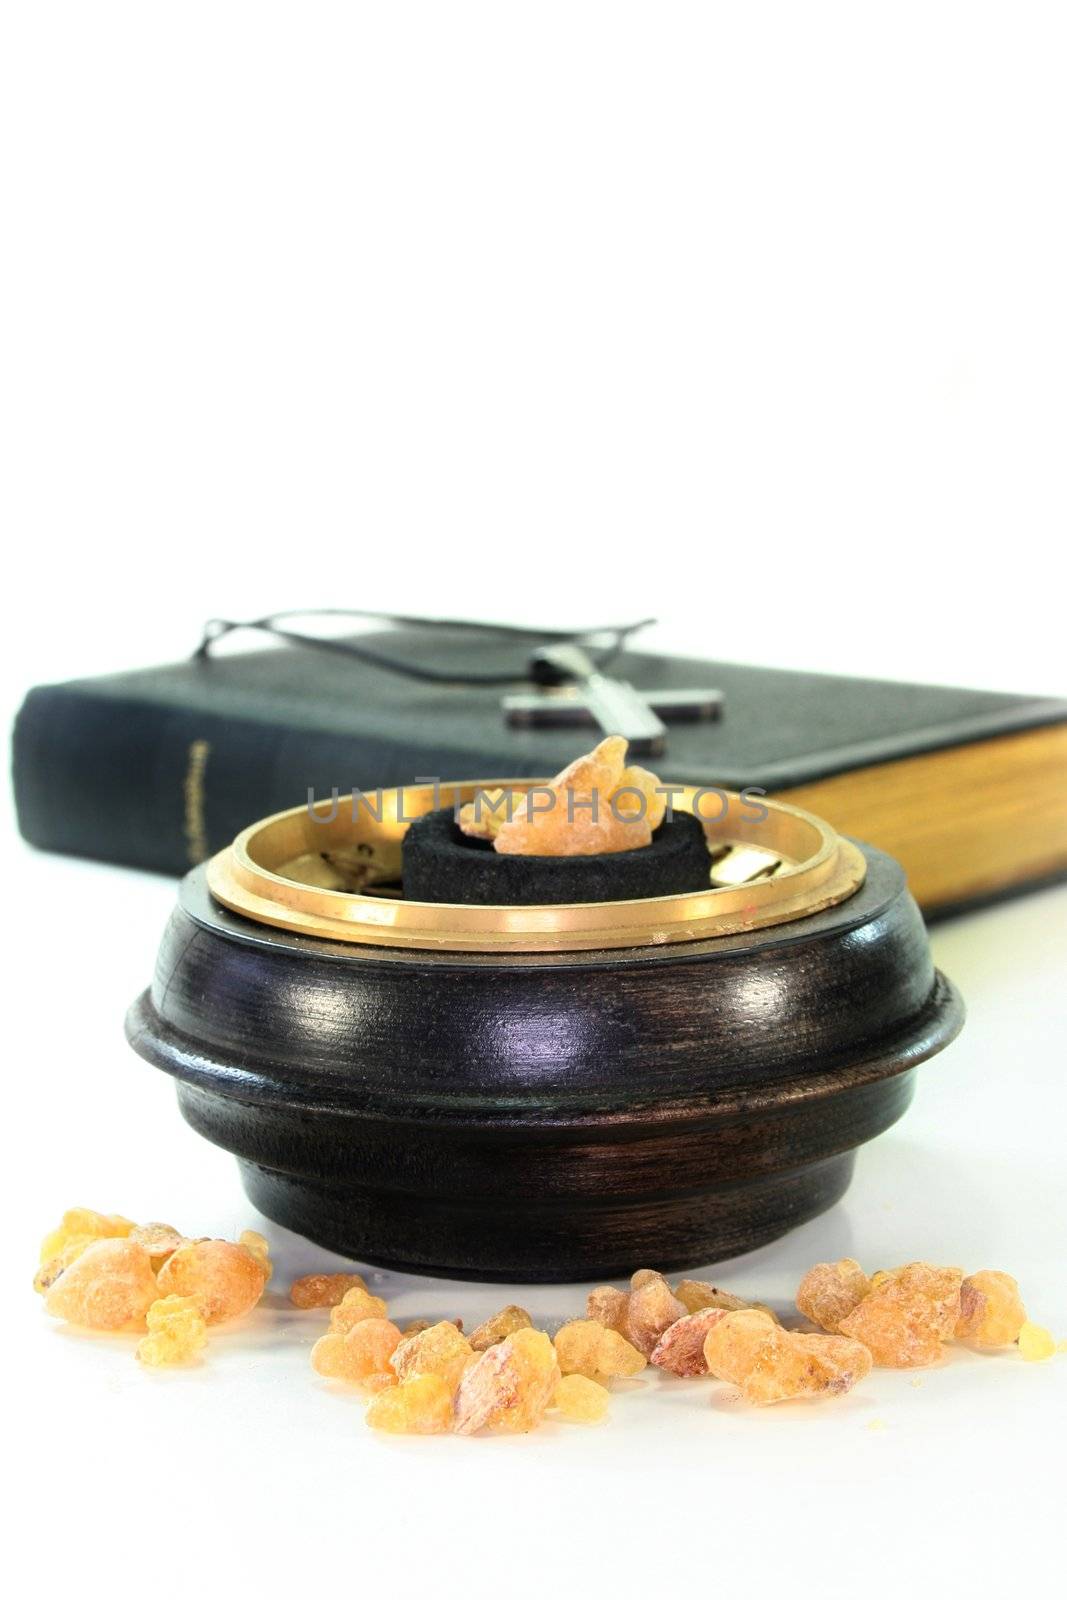 Incense bowl and song book in front of white background